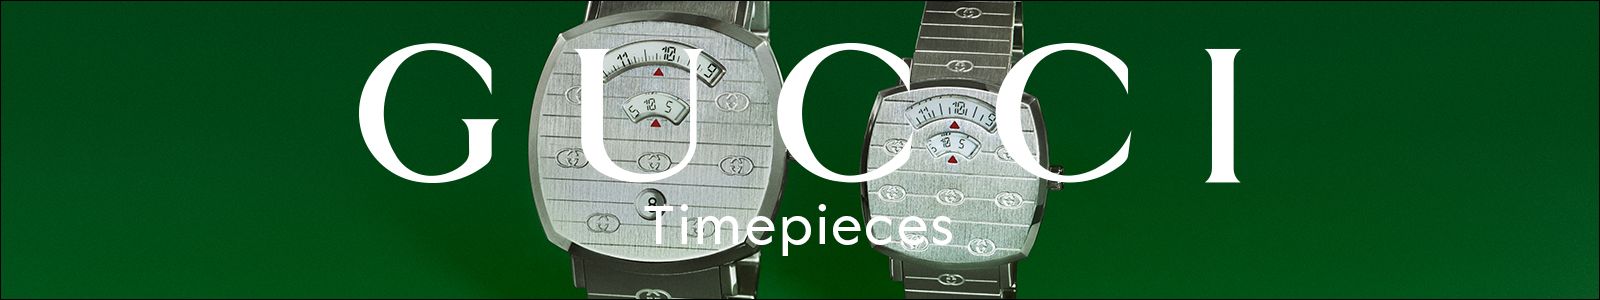 Gucci, Timepieces 